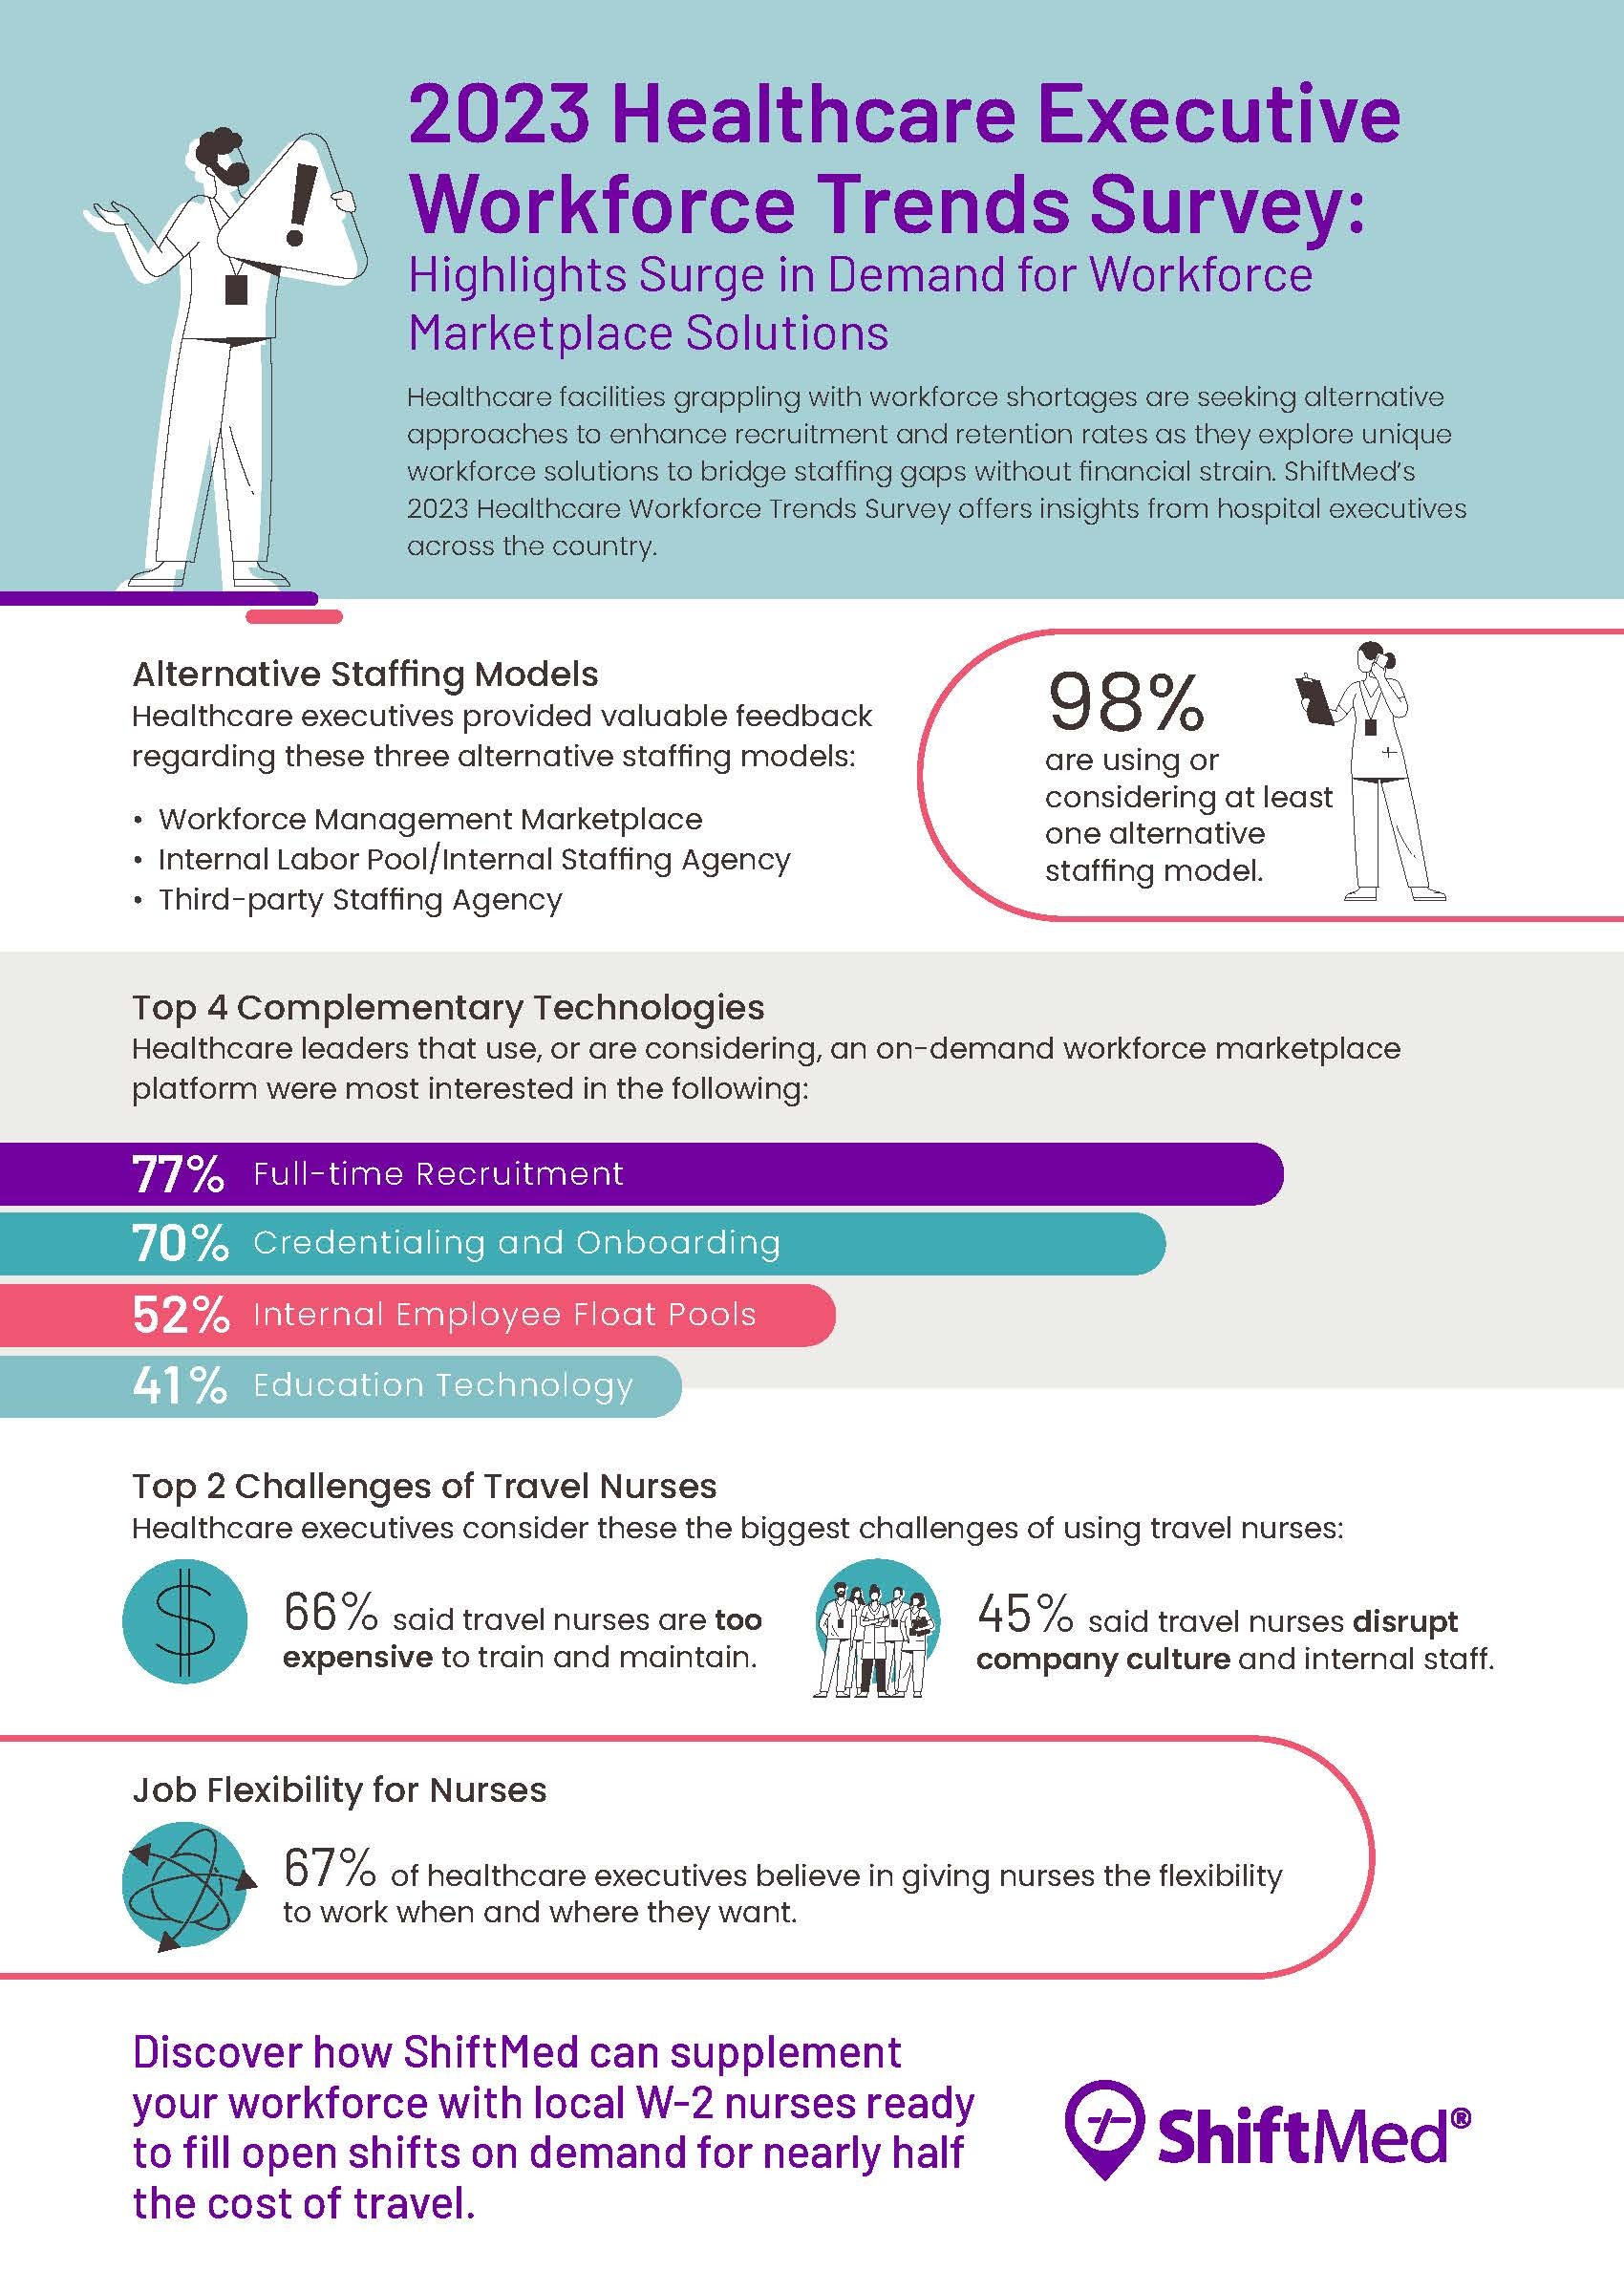 ShiftMed infographic highlighting key topics from its 2023 Healthcare Executive Workforce Trends Survey. 